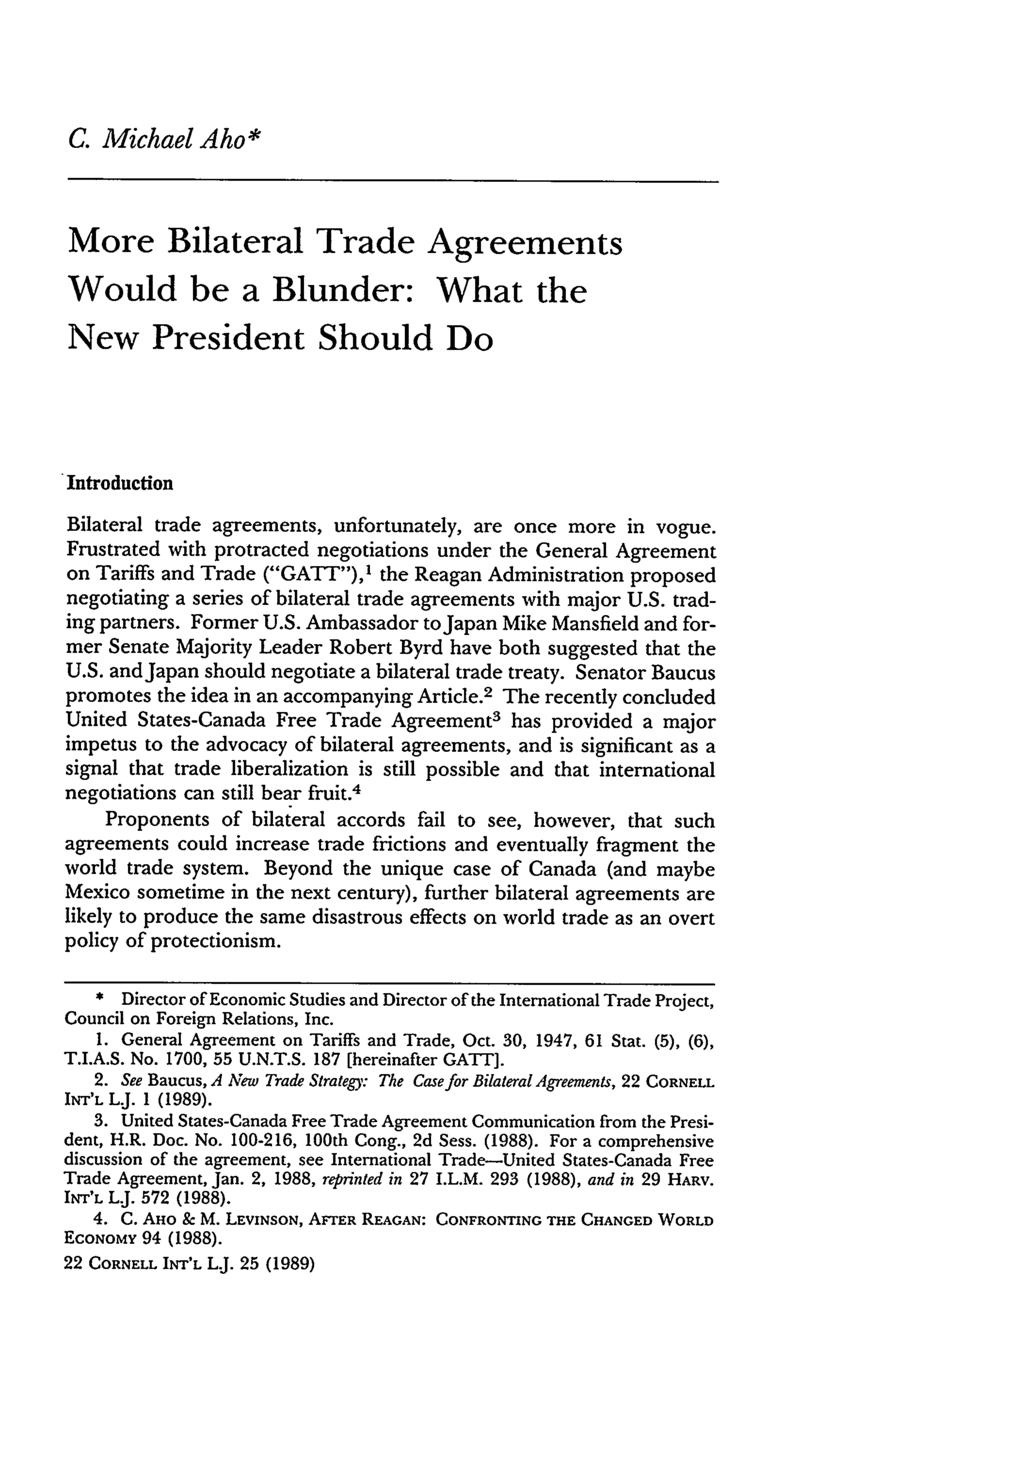 C. Michael Aho* More Bilateral Trade Agreements Would be a Blunder: What the New President Should Do Introduction Bilateral trade agreements, unfortunately, are once more in vogue.